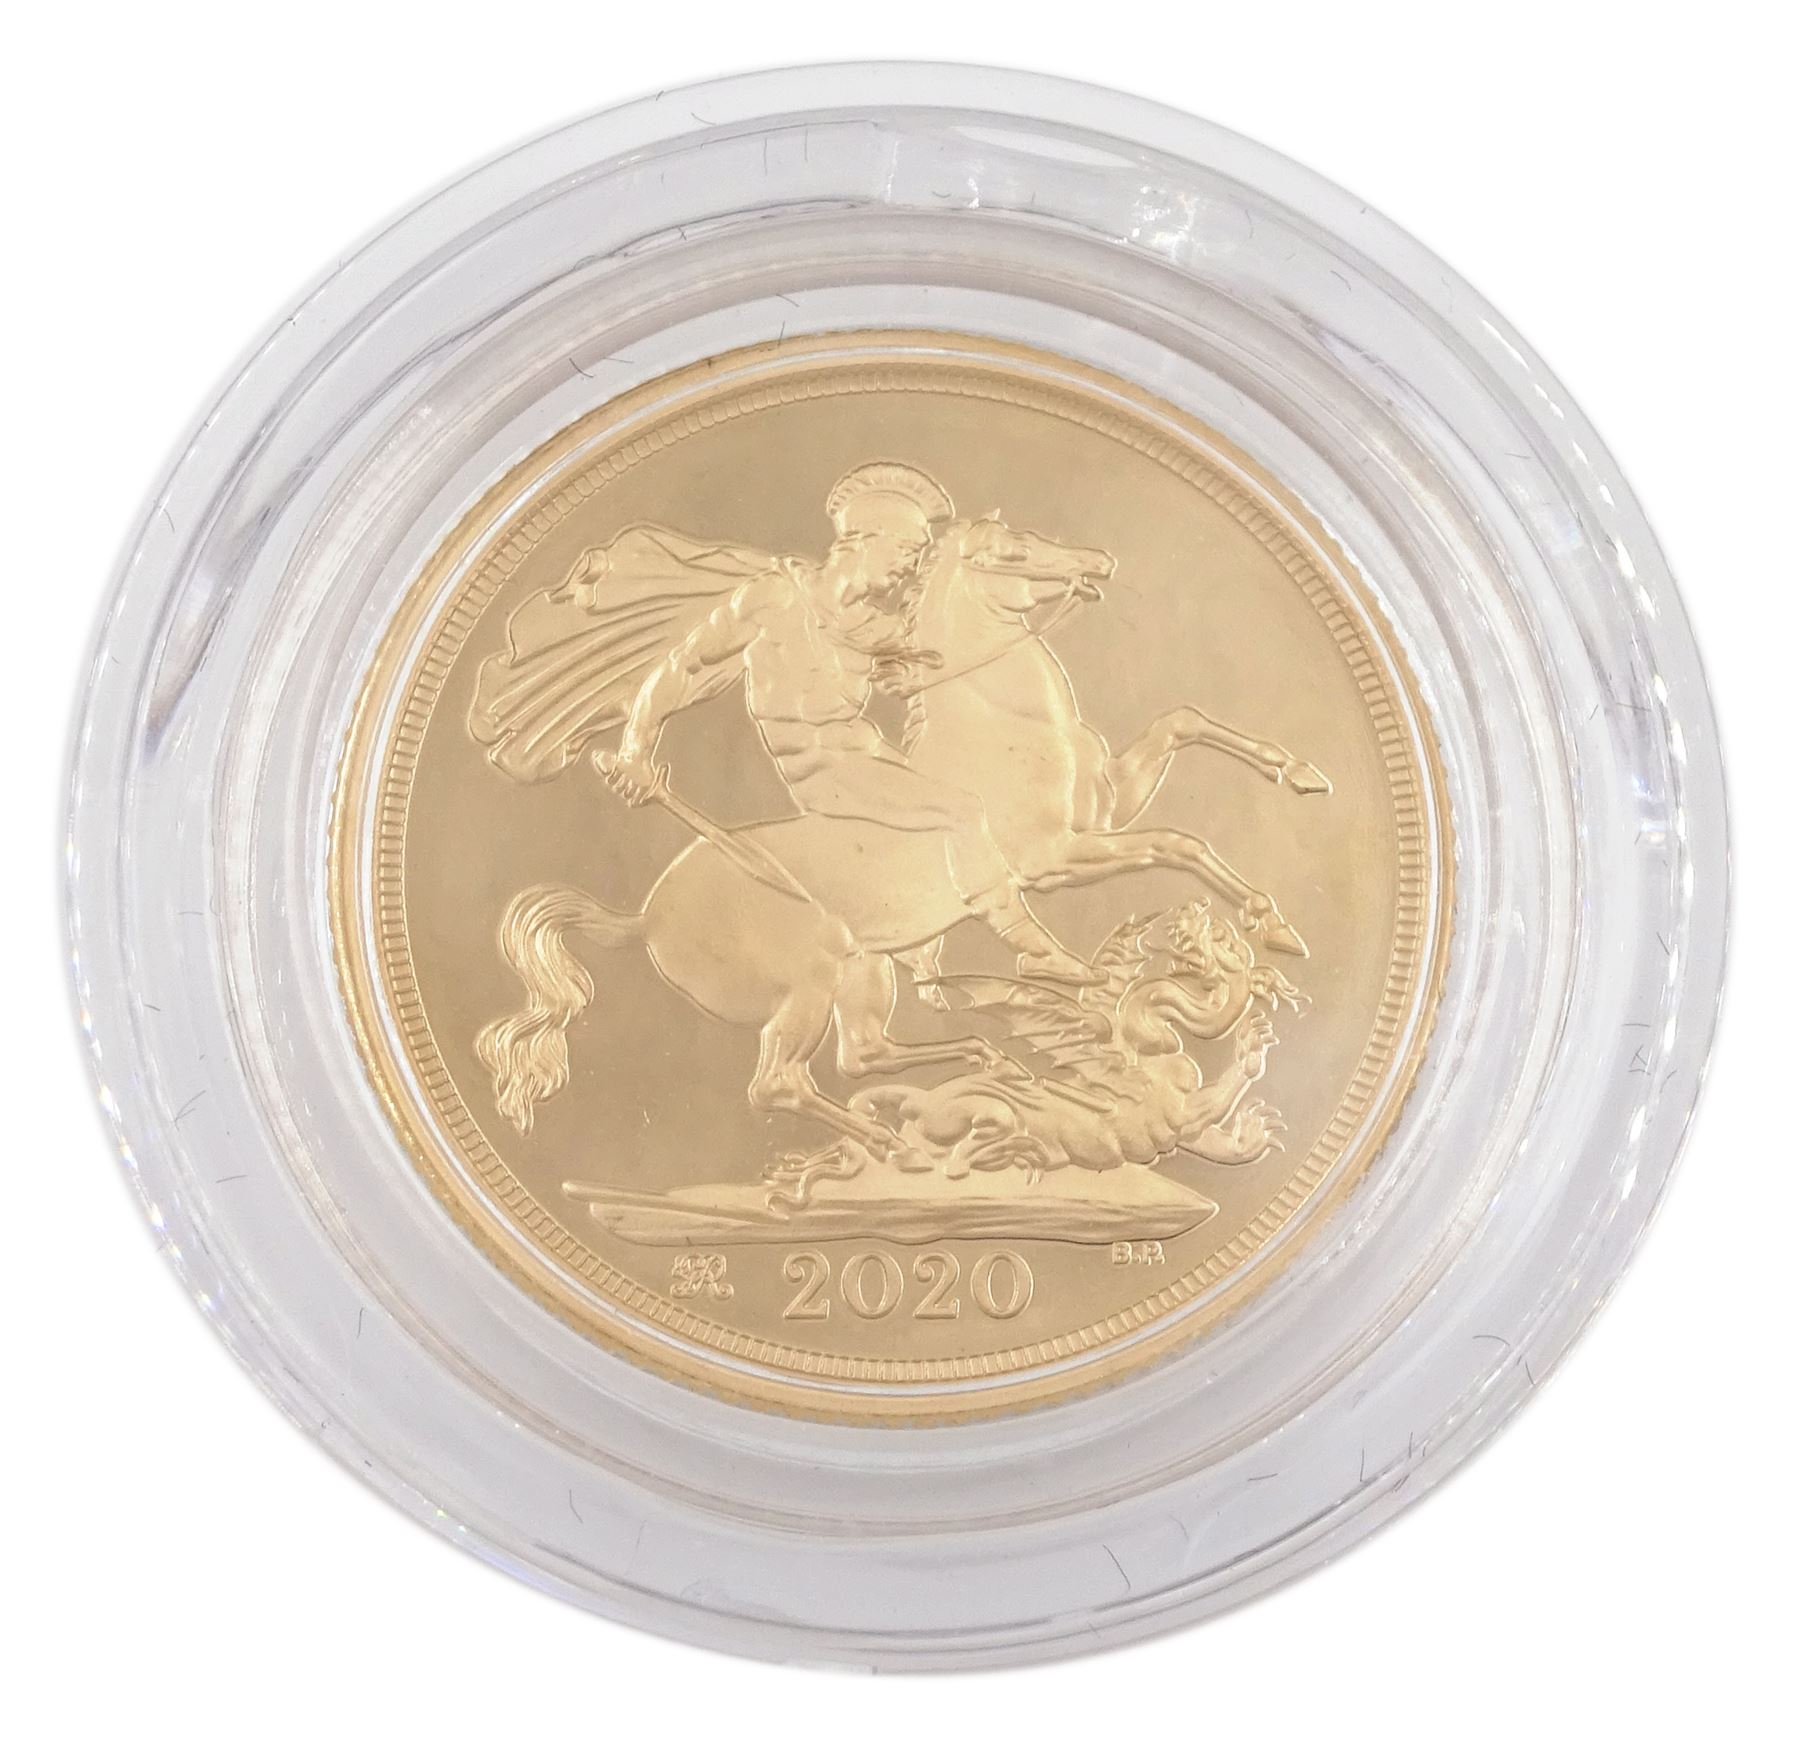 Queen Elizabeth II 2020 gold proof full sovereign coin - Image 4 of 5